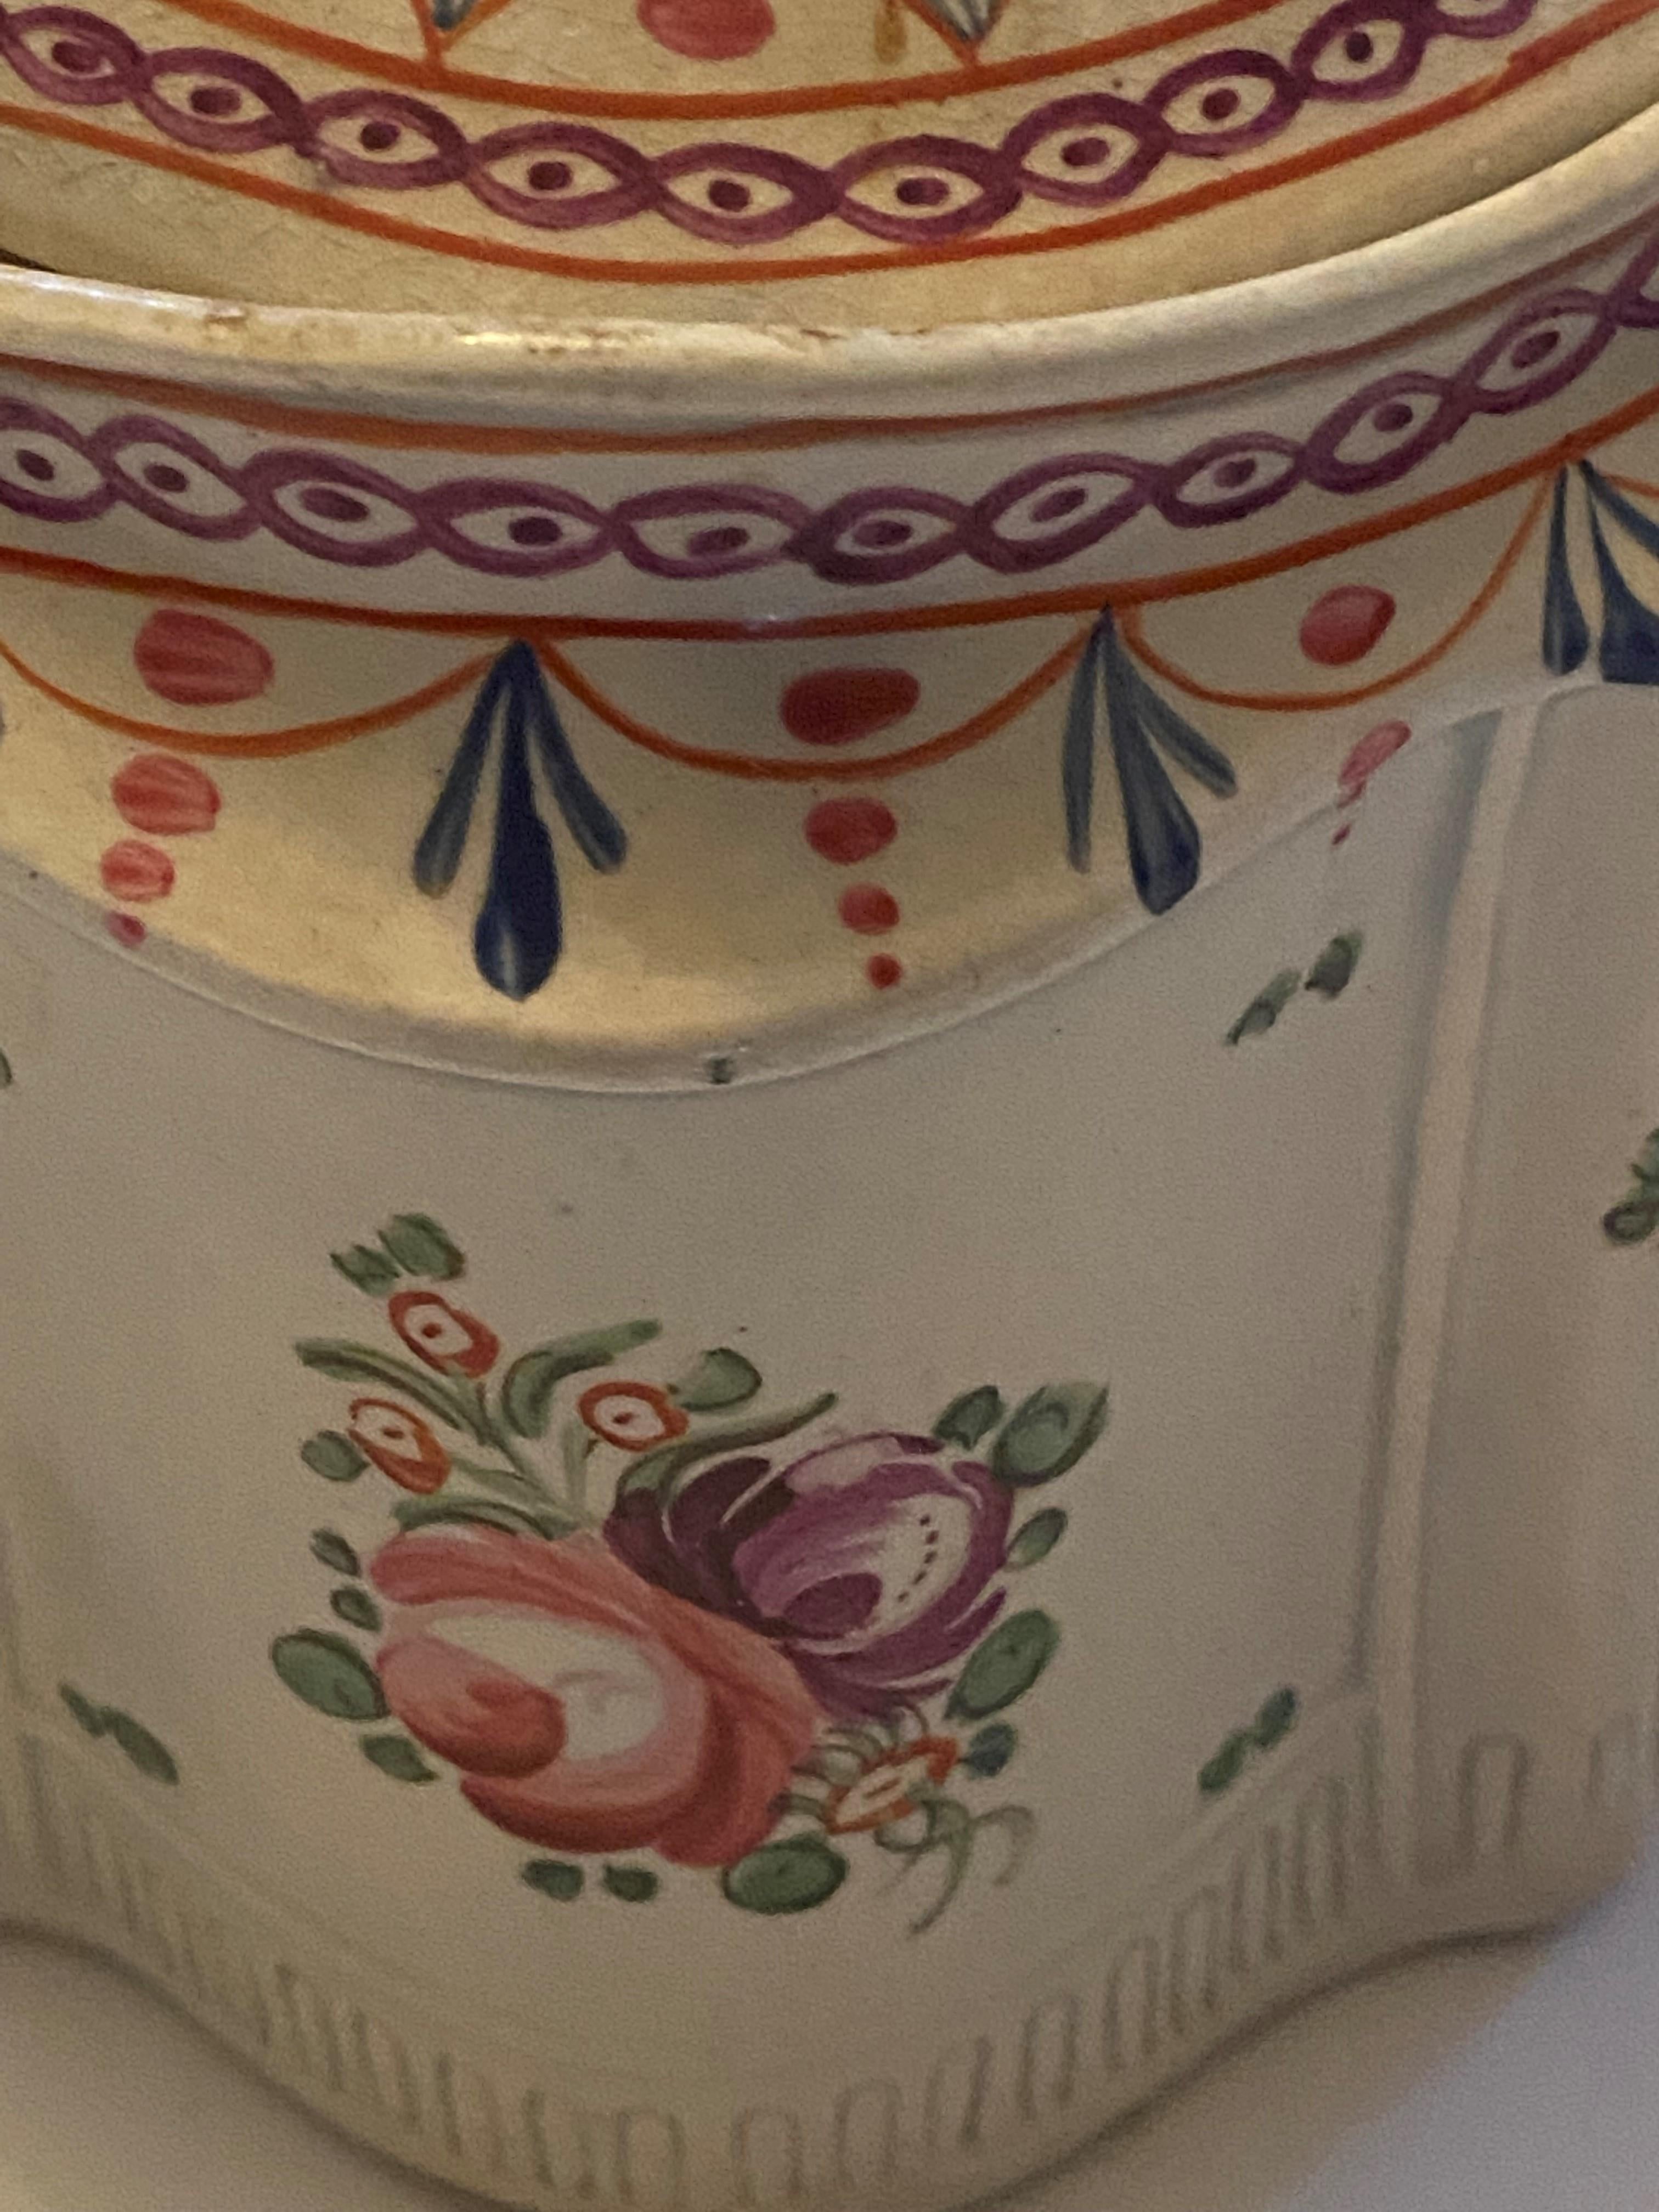 1790 Covered sugar bowl.
English pottery polychromed covered sugar bowl with swan finial. Staffordshire and you can tell; me the factory since I am not a pottery porcelain pro
 The dimensions are listed above. I cannot be sure of the discoloration